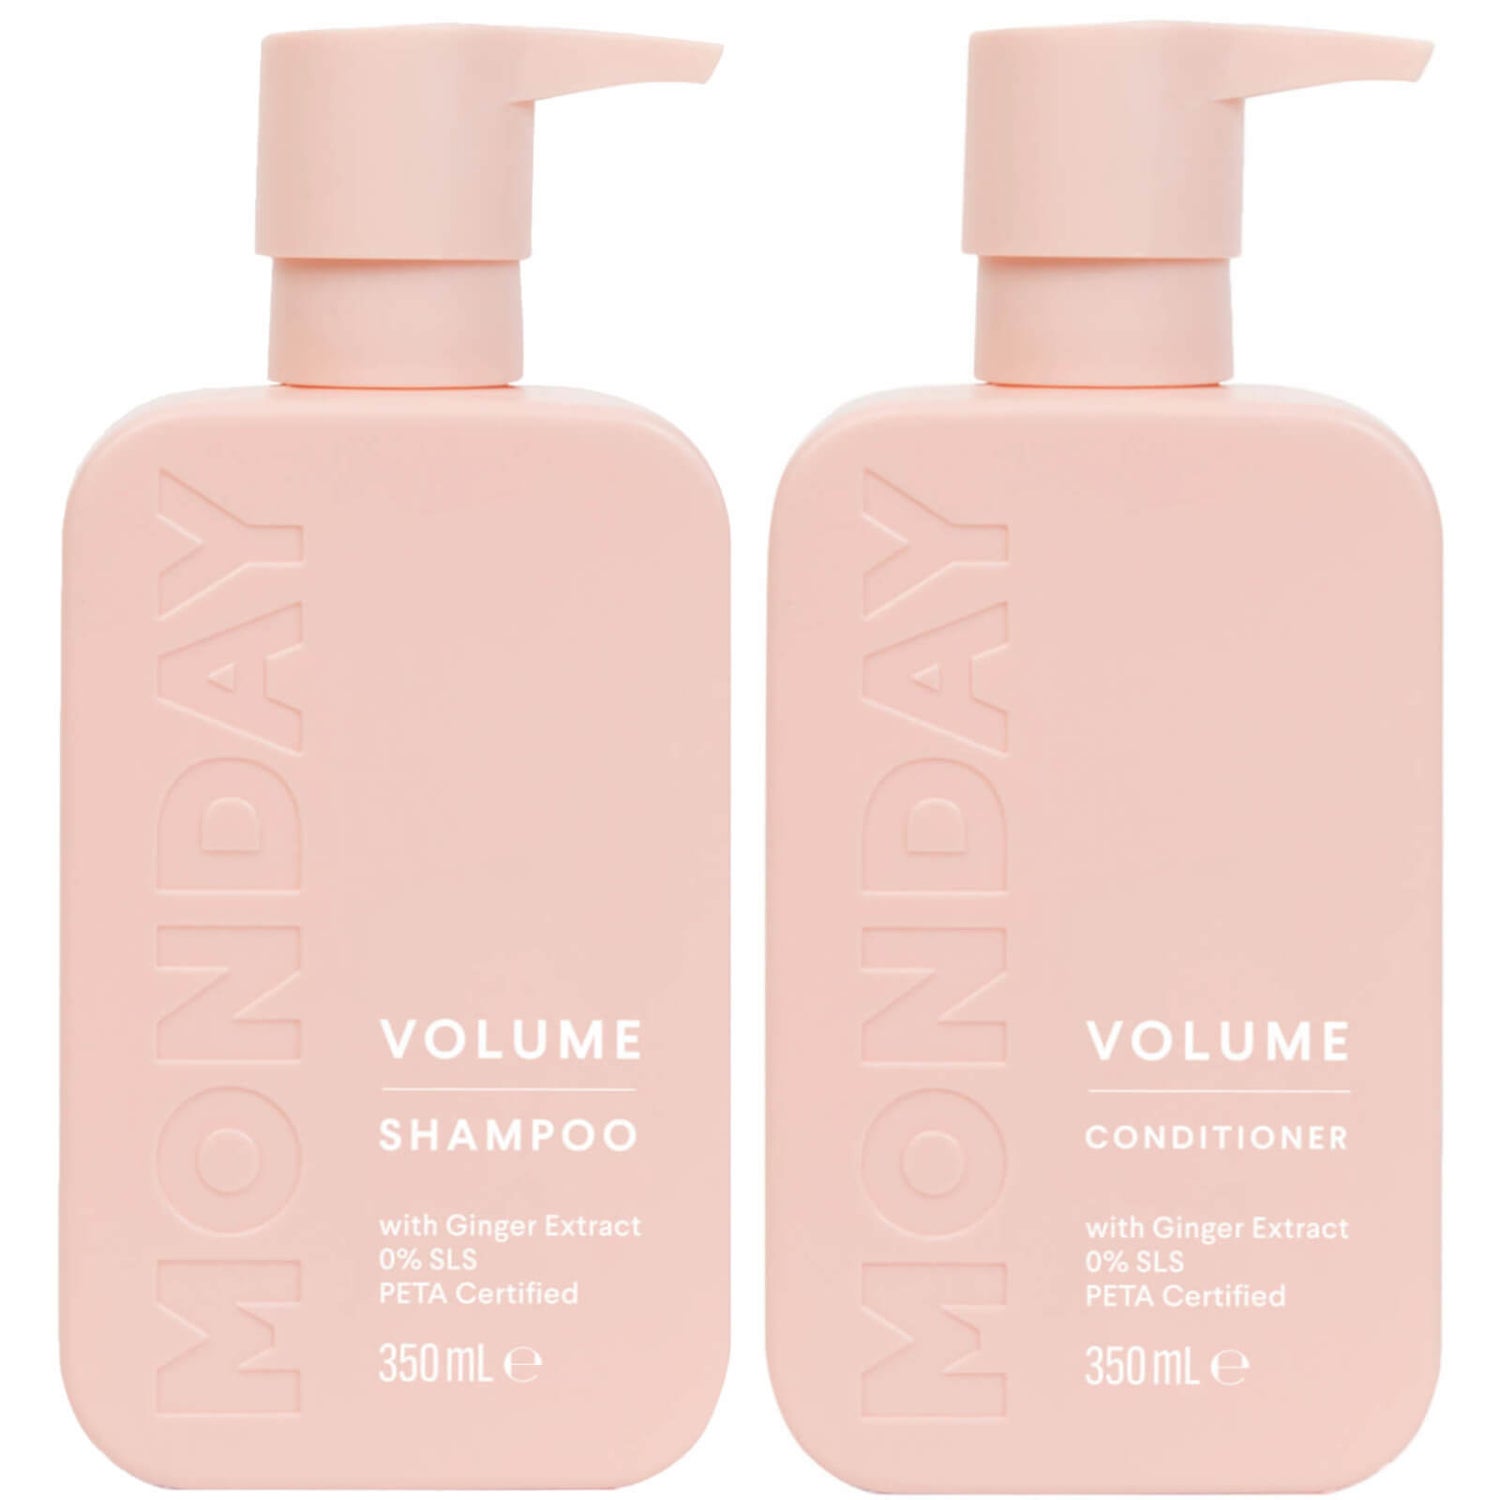 MONDAY Haircare Volume Shampoo and Conditioner Duo